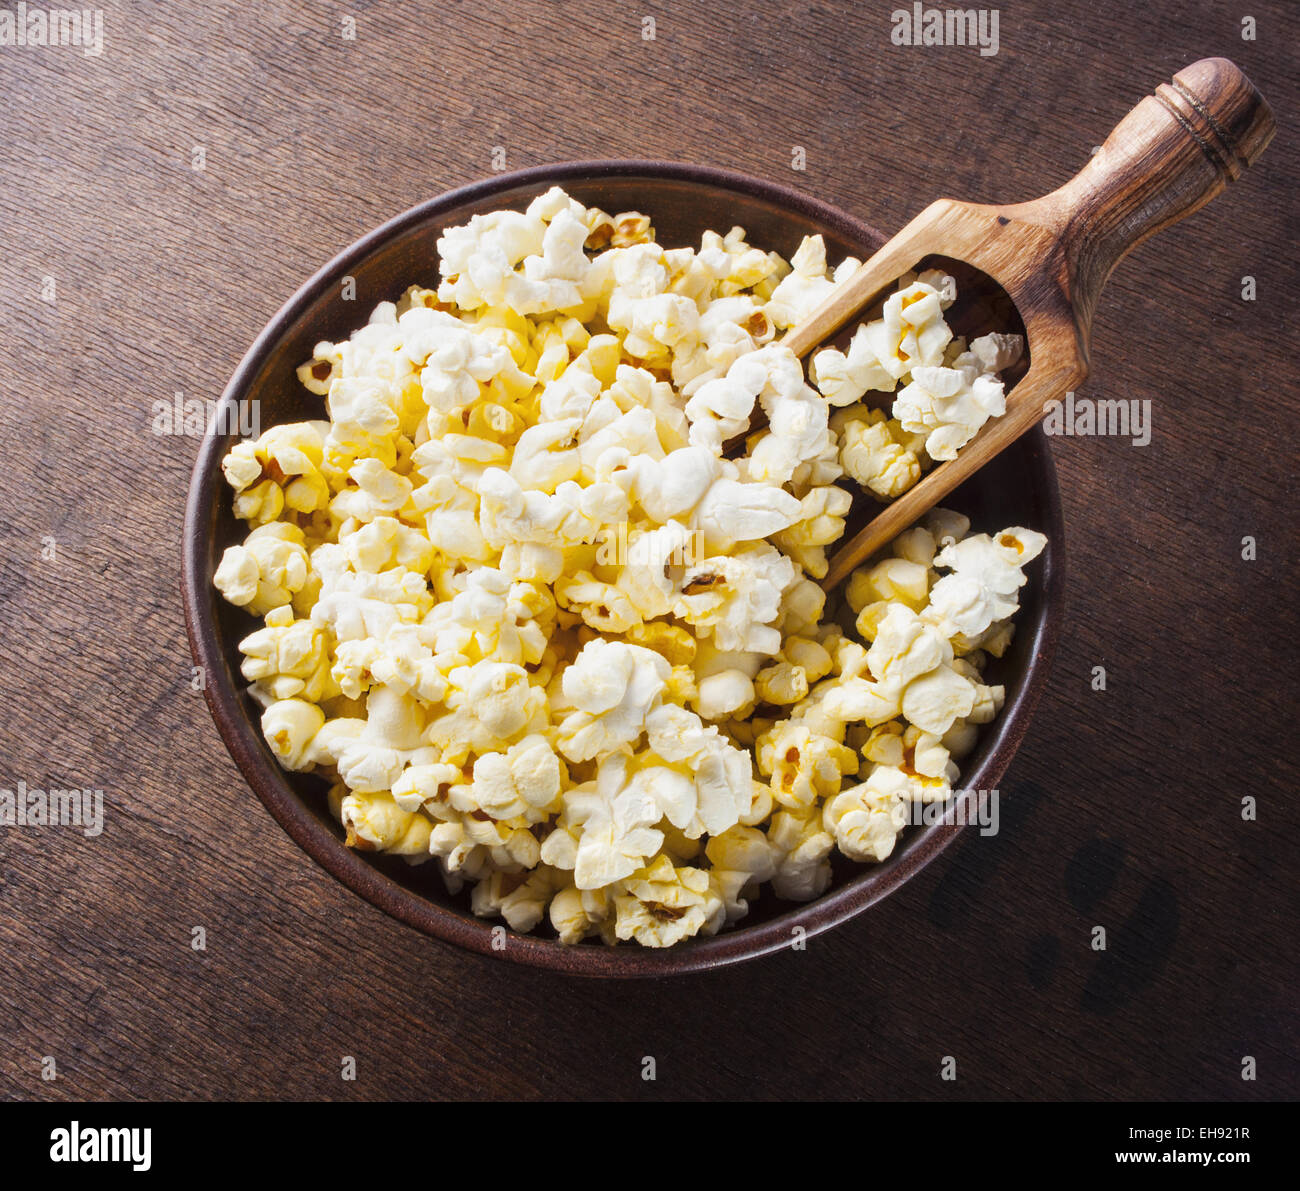 Fresh popcorn in bowl on wooden table. Stock Photo